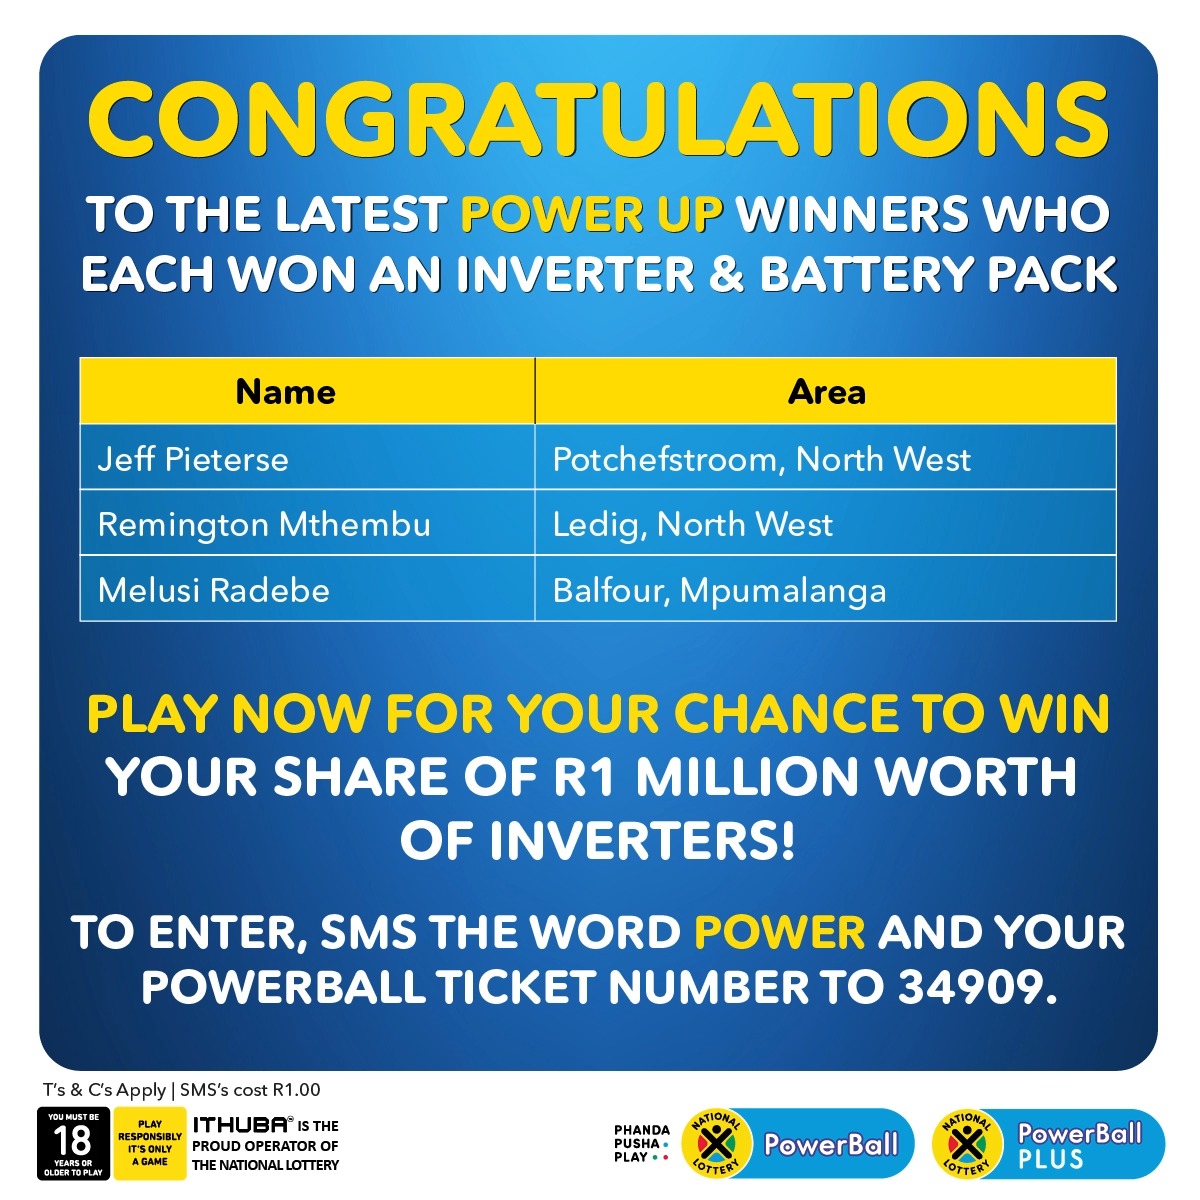 Congratulations to the 3 latest #PowerUp winners who each won an inverter & battery pack. PLAY NOW & you could also win your share of R1 MILLION worth of inverters. SMS the word POWER and your PowerBall ticket number to 34909. #PhandaPushaPlay https://t.co/kX5Mpp0nq6